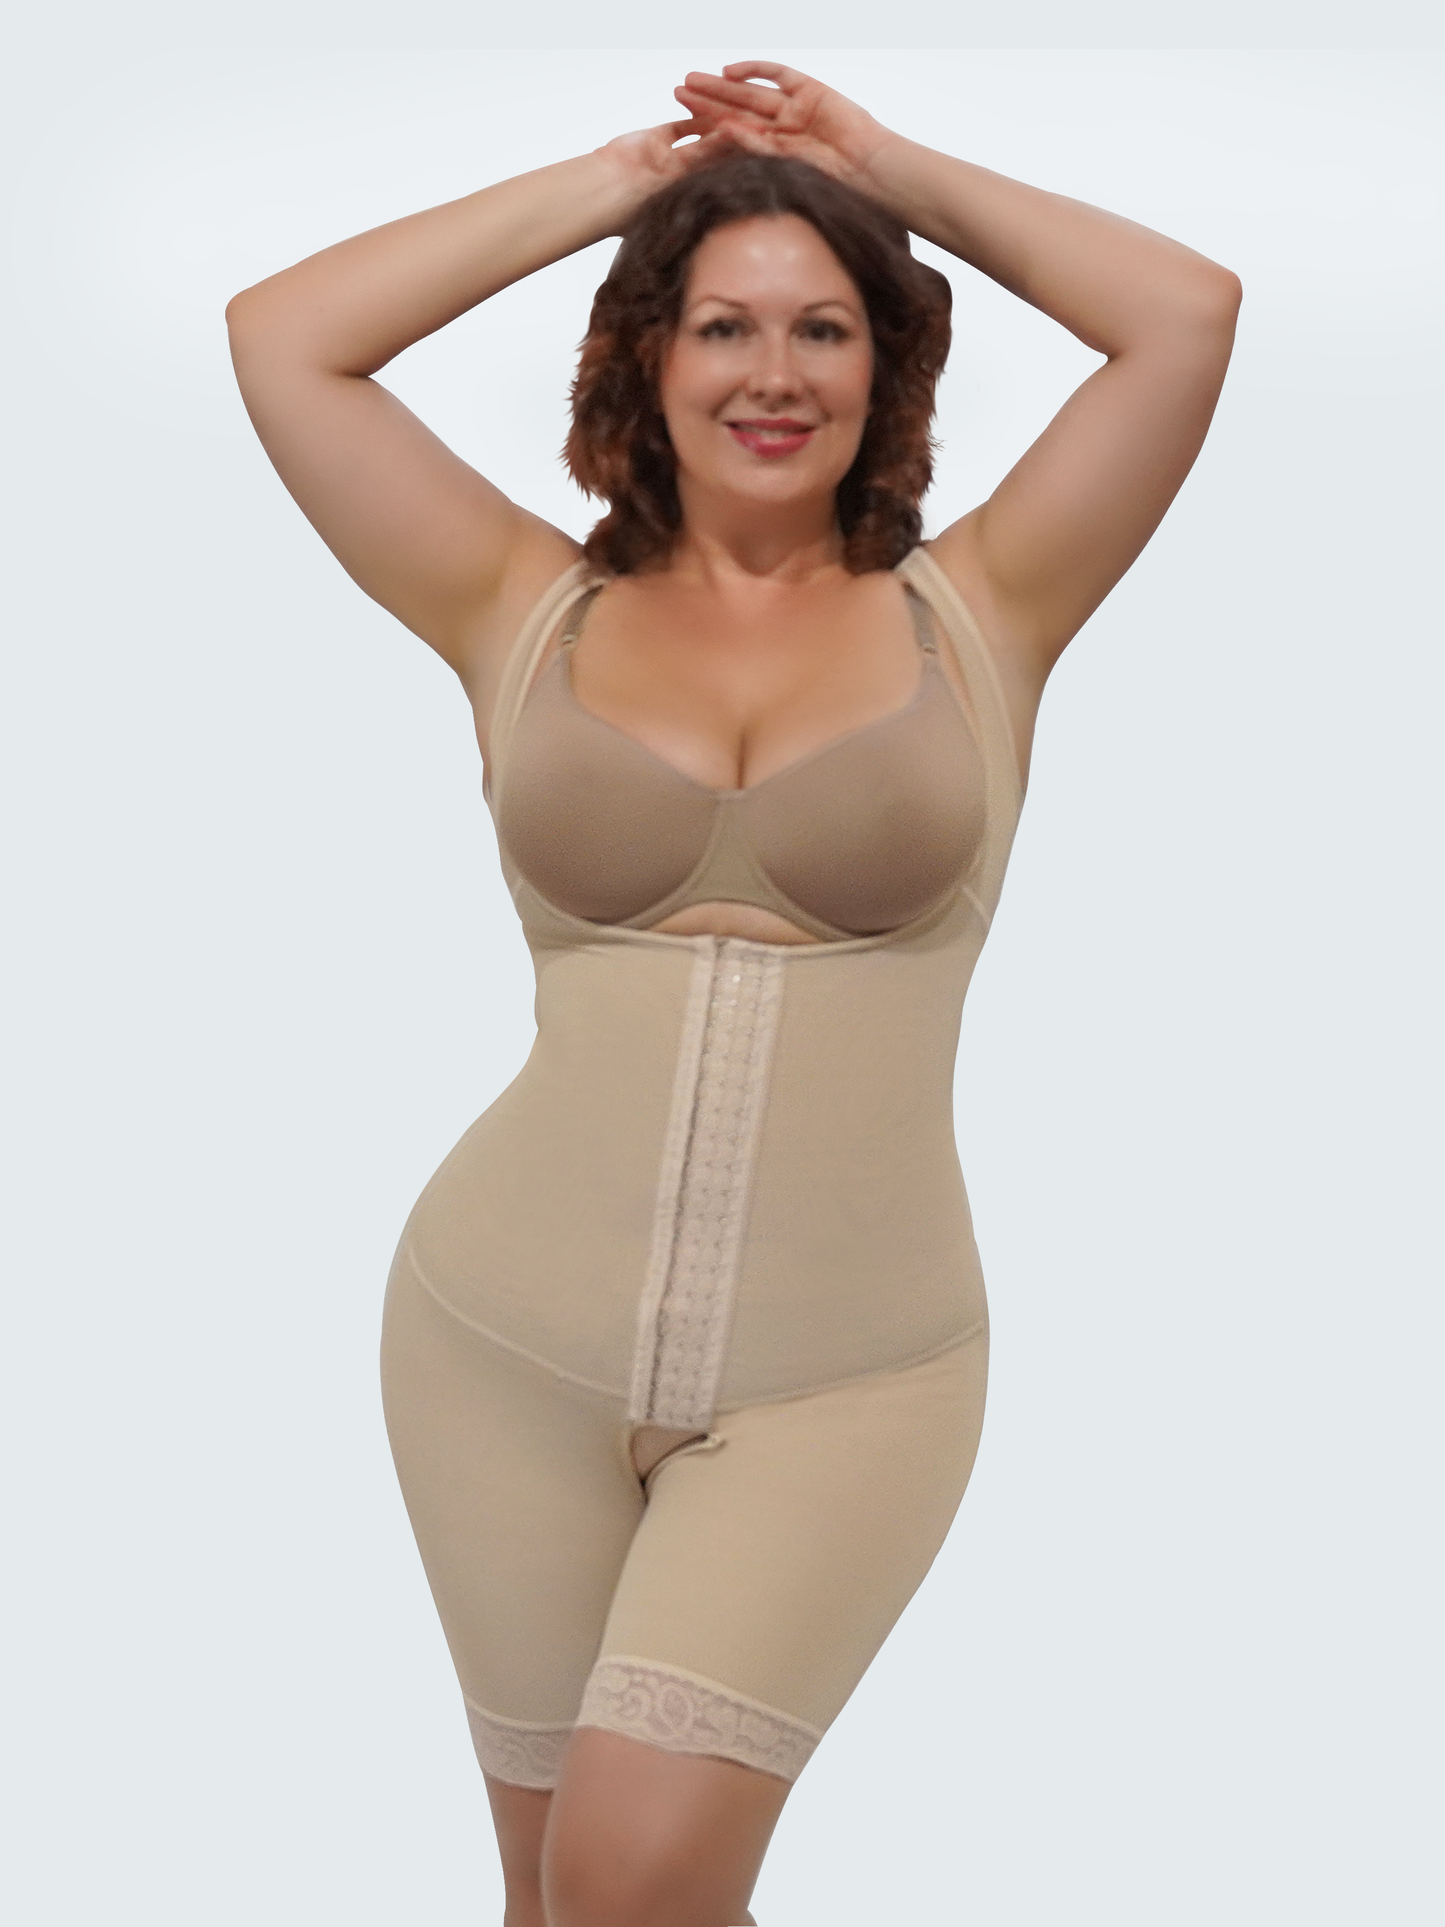 Model: 9182 Butt Lifter Body Shaper With Tummy Control and Adjustable Straps